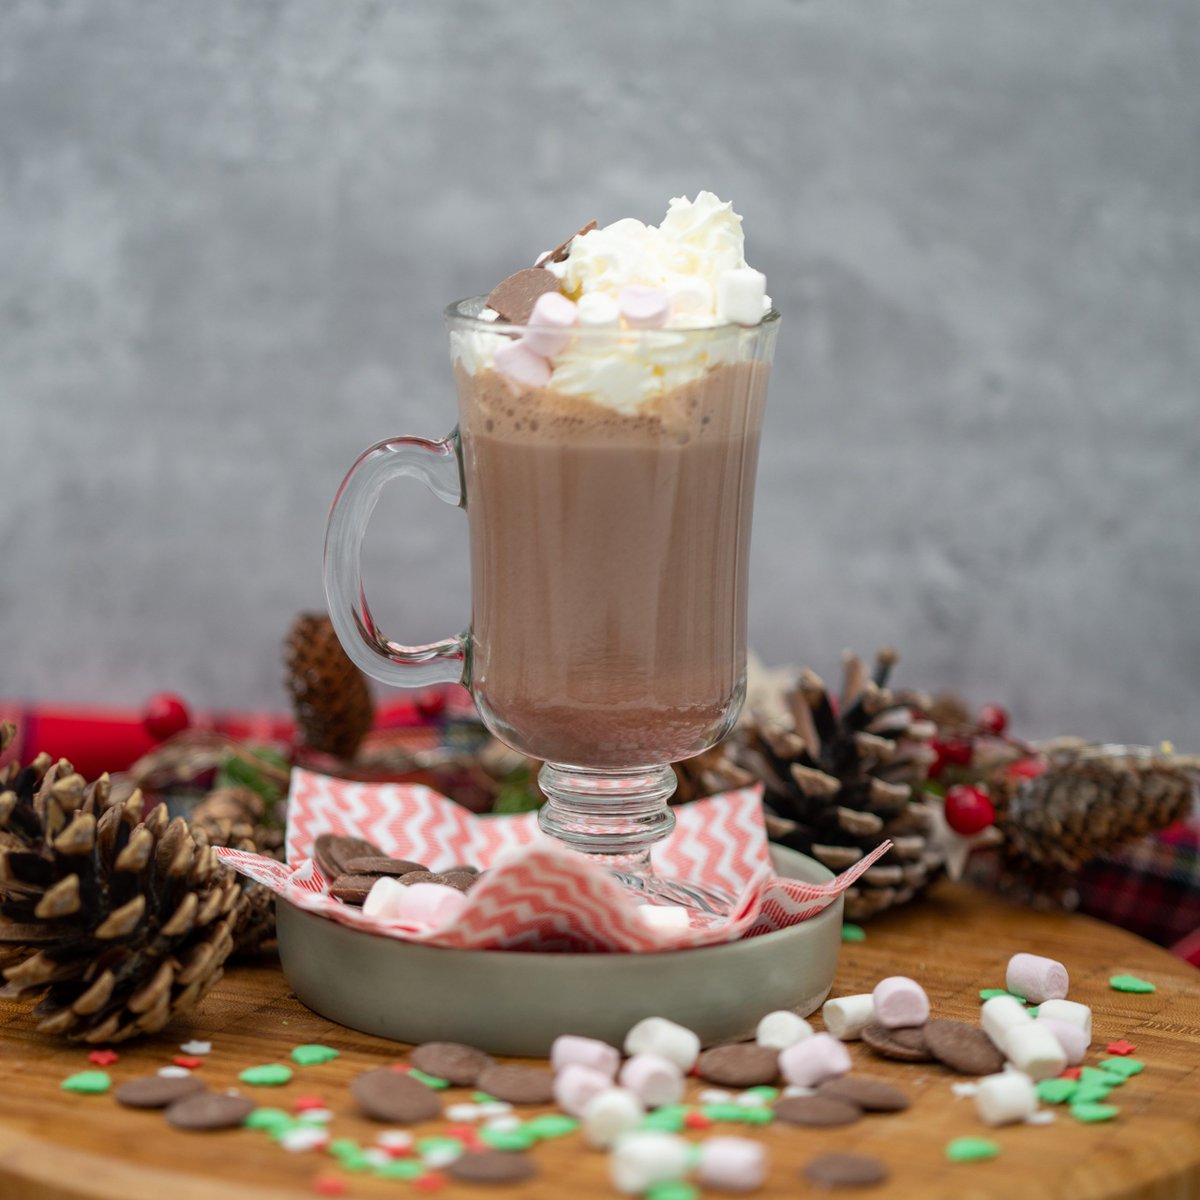 Three delicious hot chocolate drinks perfect for Christmas. And the best bit is we’ve added some suggestions to make them boozy! 🍮 🎅 

Full recipe at ed.gr/dptfo
#christmasrecipes #hotchocolate #boozyhotchocolate